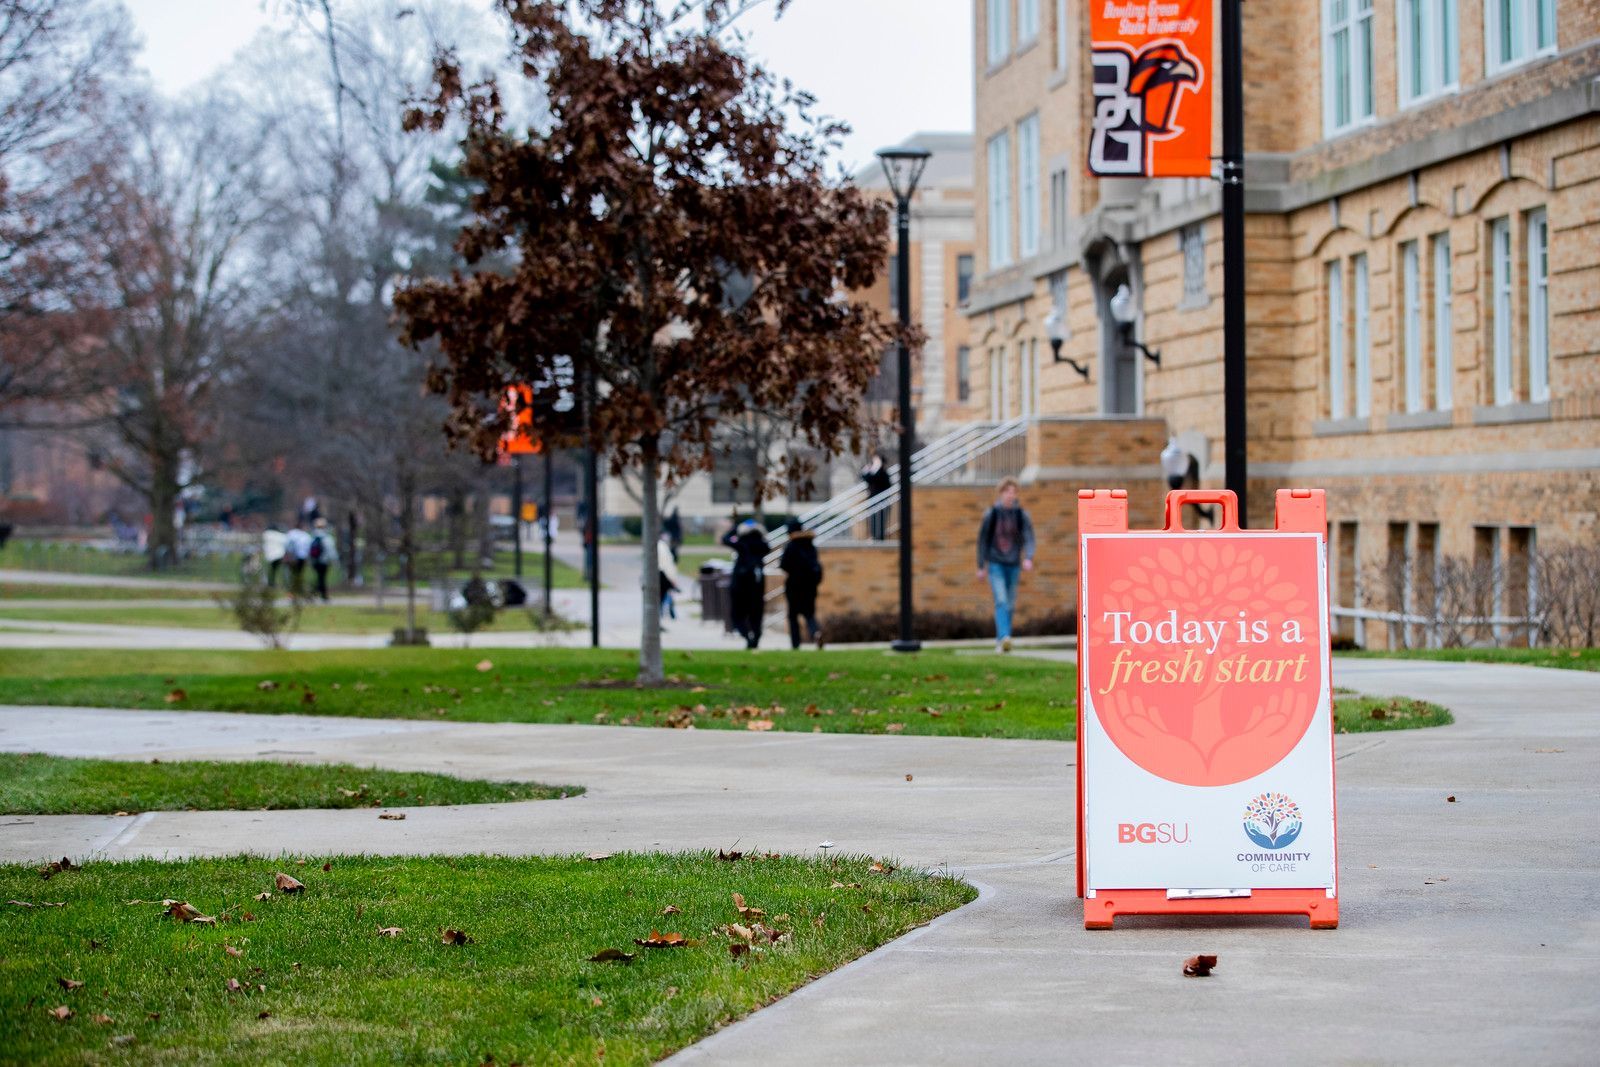 BGSU Advertising for the on-campus food bank